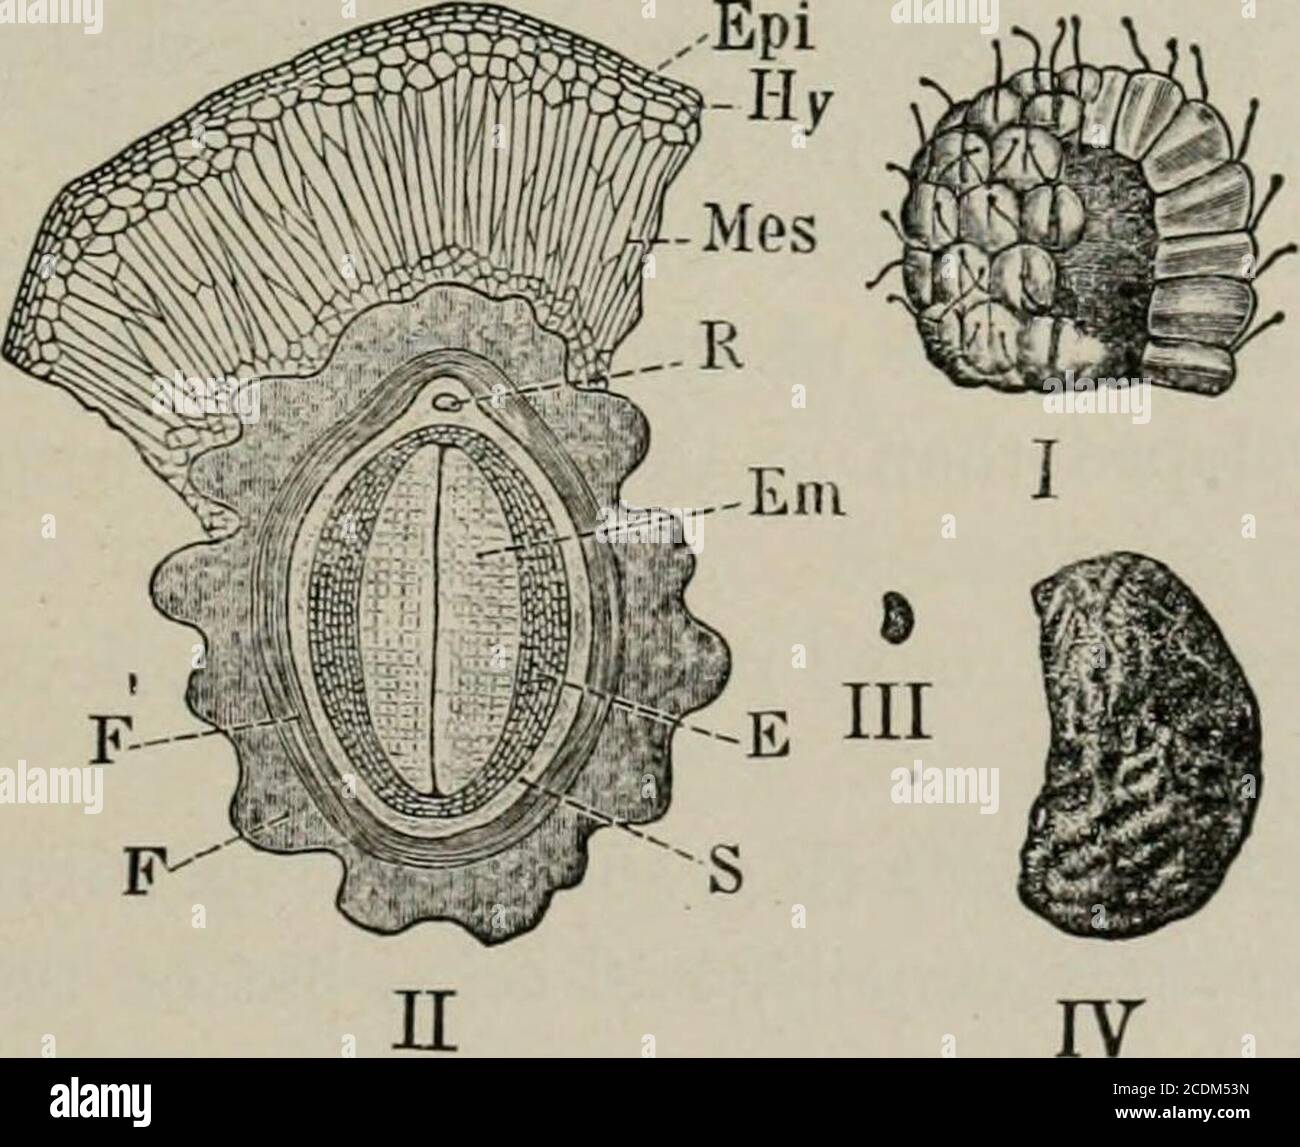 . The microscopy of vegetable foods, with special reference to the detection of adulteration and the diagnosis of mixtures . ens. Bailey ^ states that the red raspberries cultivated in America areoffspring of the native R. sirlgosiis INIichx., which, however, is closelyrelated to the European raspberr R. IdcBus L. The yellow varietiesare but albino forms of these species. The raspberry, blackberry, and other bramble fruits {Ruhus) areintermediate in both macroscopic and microscopic structure betweenthe strawberry (Fragaria) and the stone fruits (Prunus). They resemblethe strawberry in that th Stock Photo